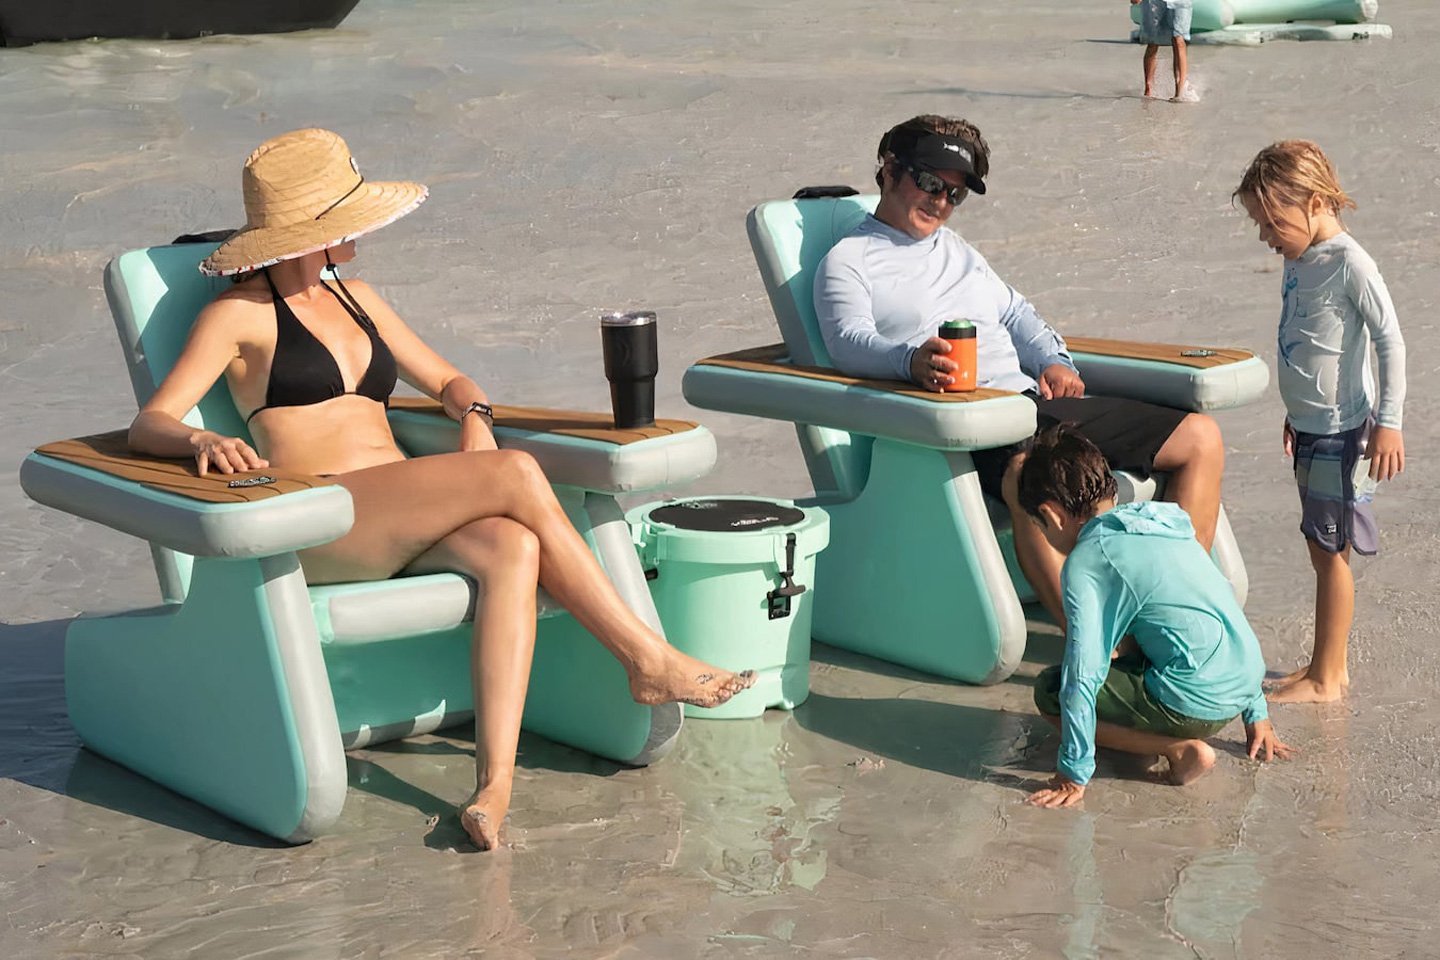 #This inflatable beach chair takes on a more realistic form factor for comfortability